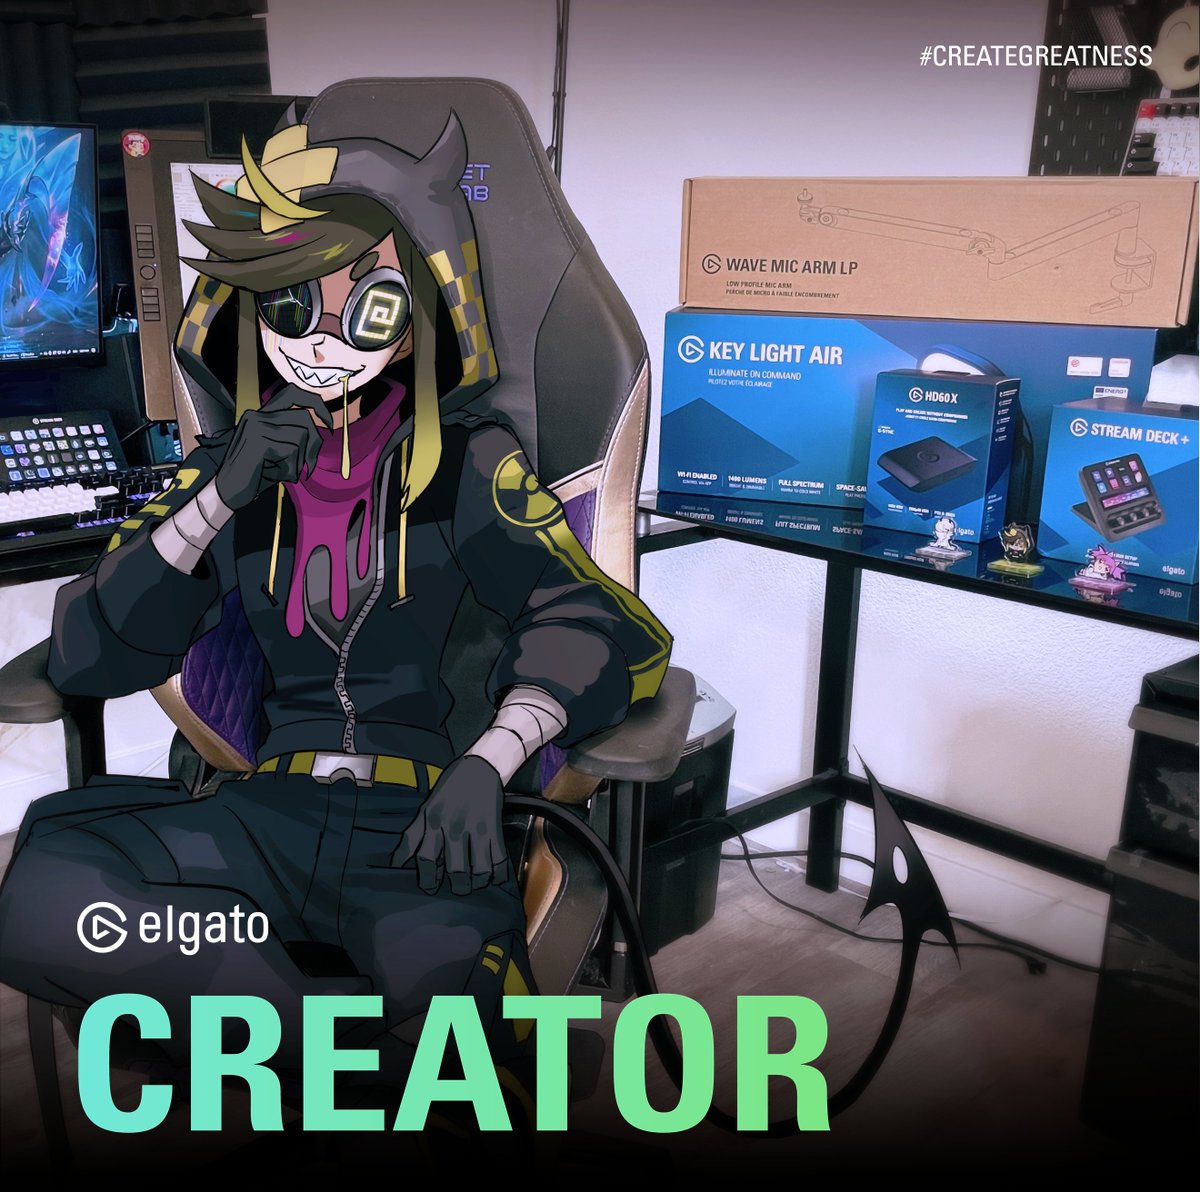 I'm excited to announce: I'm an #elgatoAmbassador ! Their products have been a core part of my workstation for years and I'm thankful that @elgato sent me even more gear to upgrade my setup and #creategreatness

If you need any, here's my affiliate link ⤵️
elgato.sjv.io/ffsade